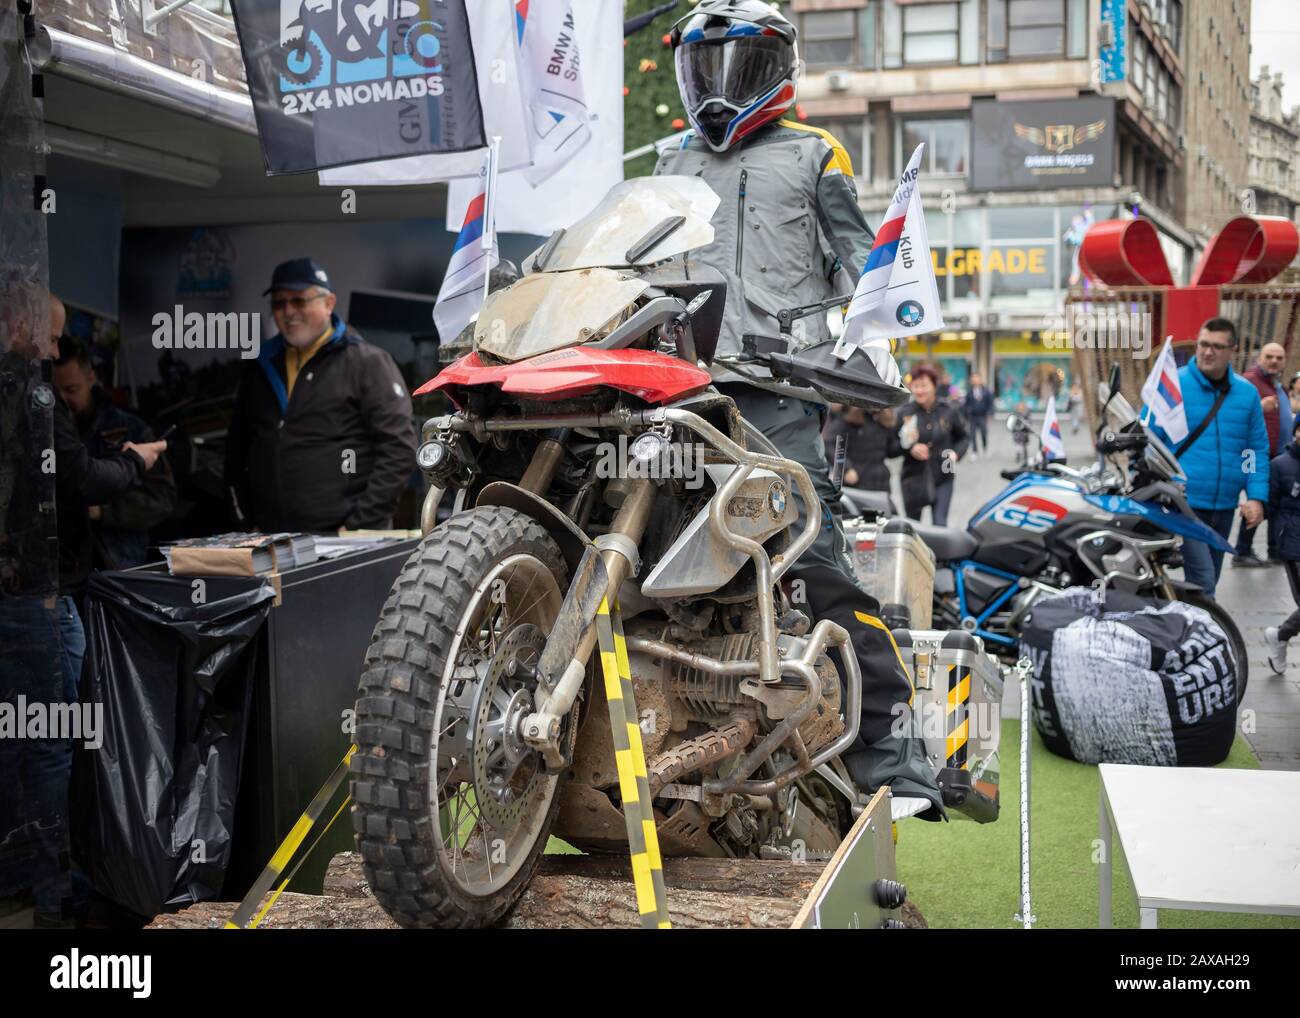 Serbia, Feb 7, 2020: BMW off road motorcycle exposed at Knez Mihailova Street in Belgrade city center Stock Photo